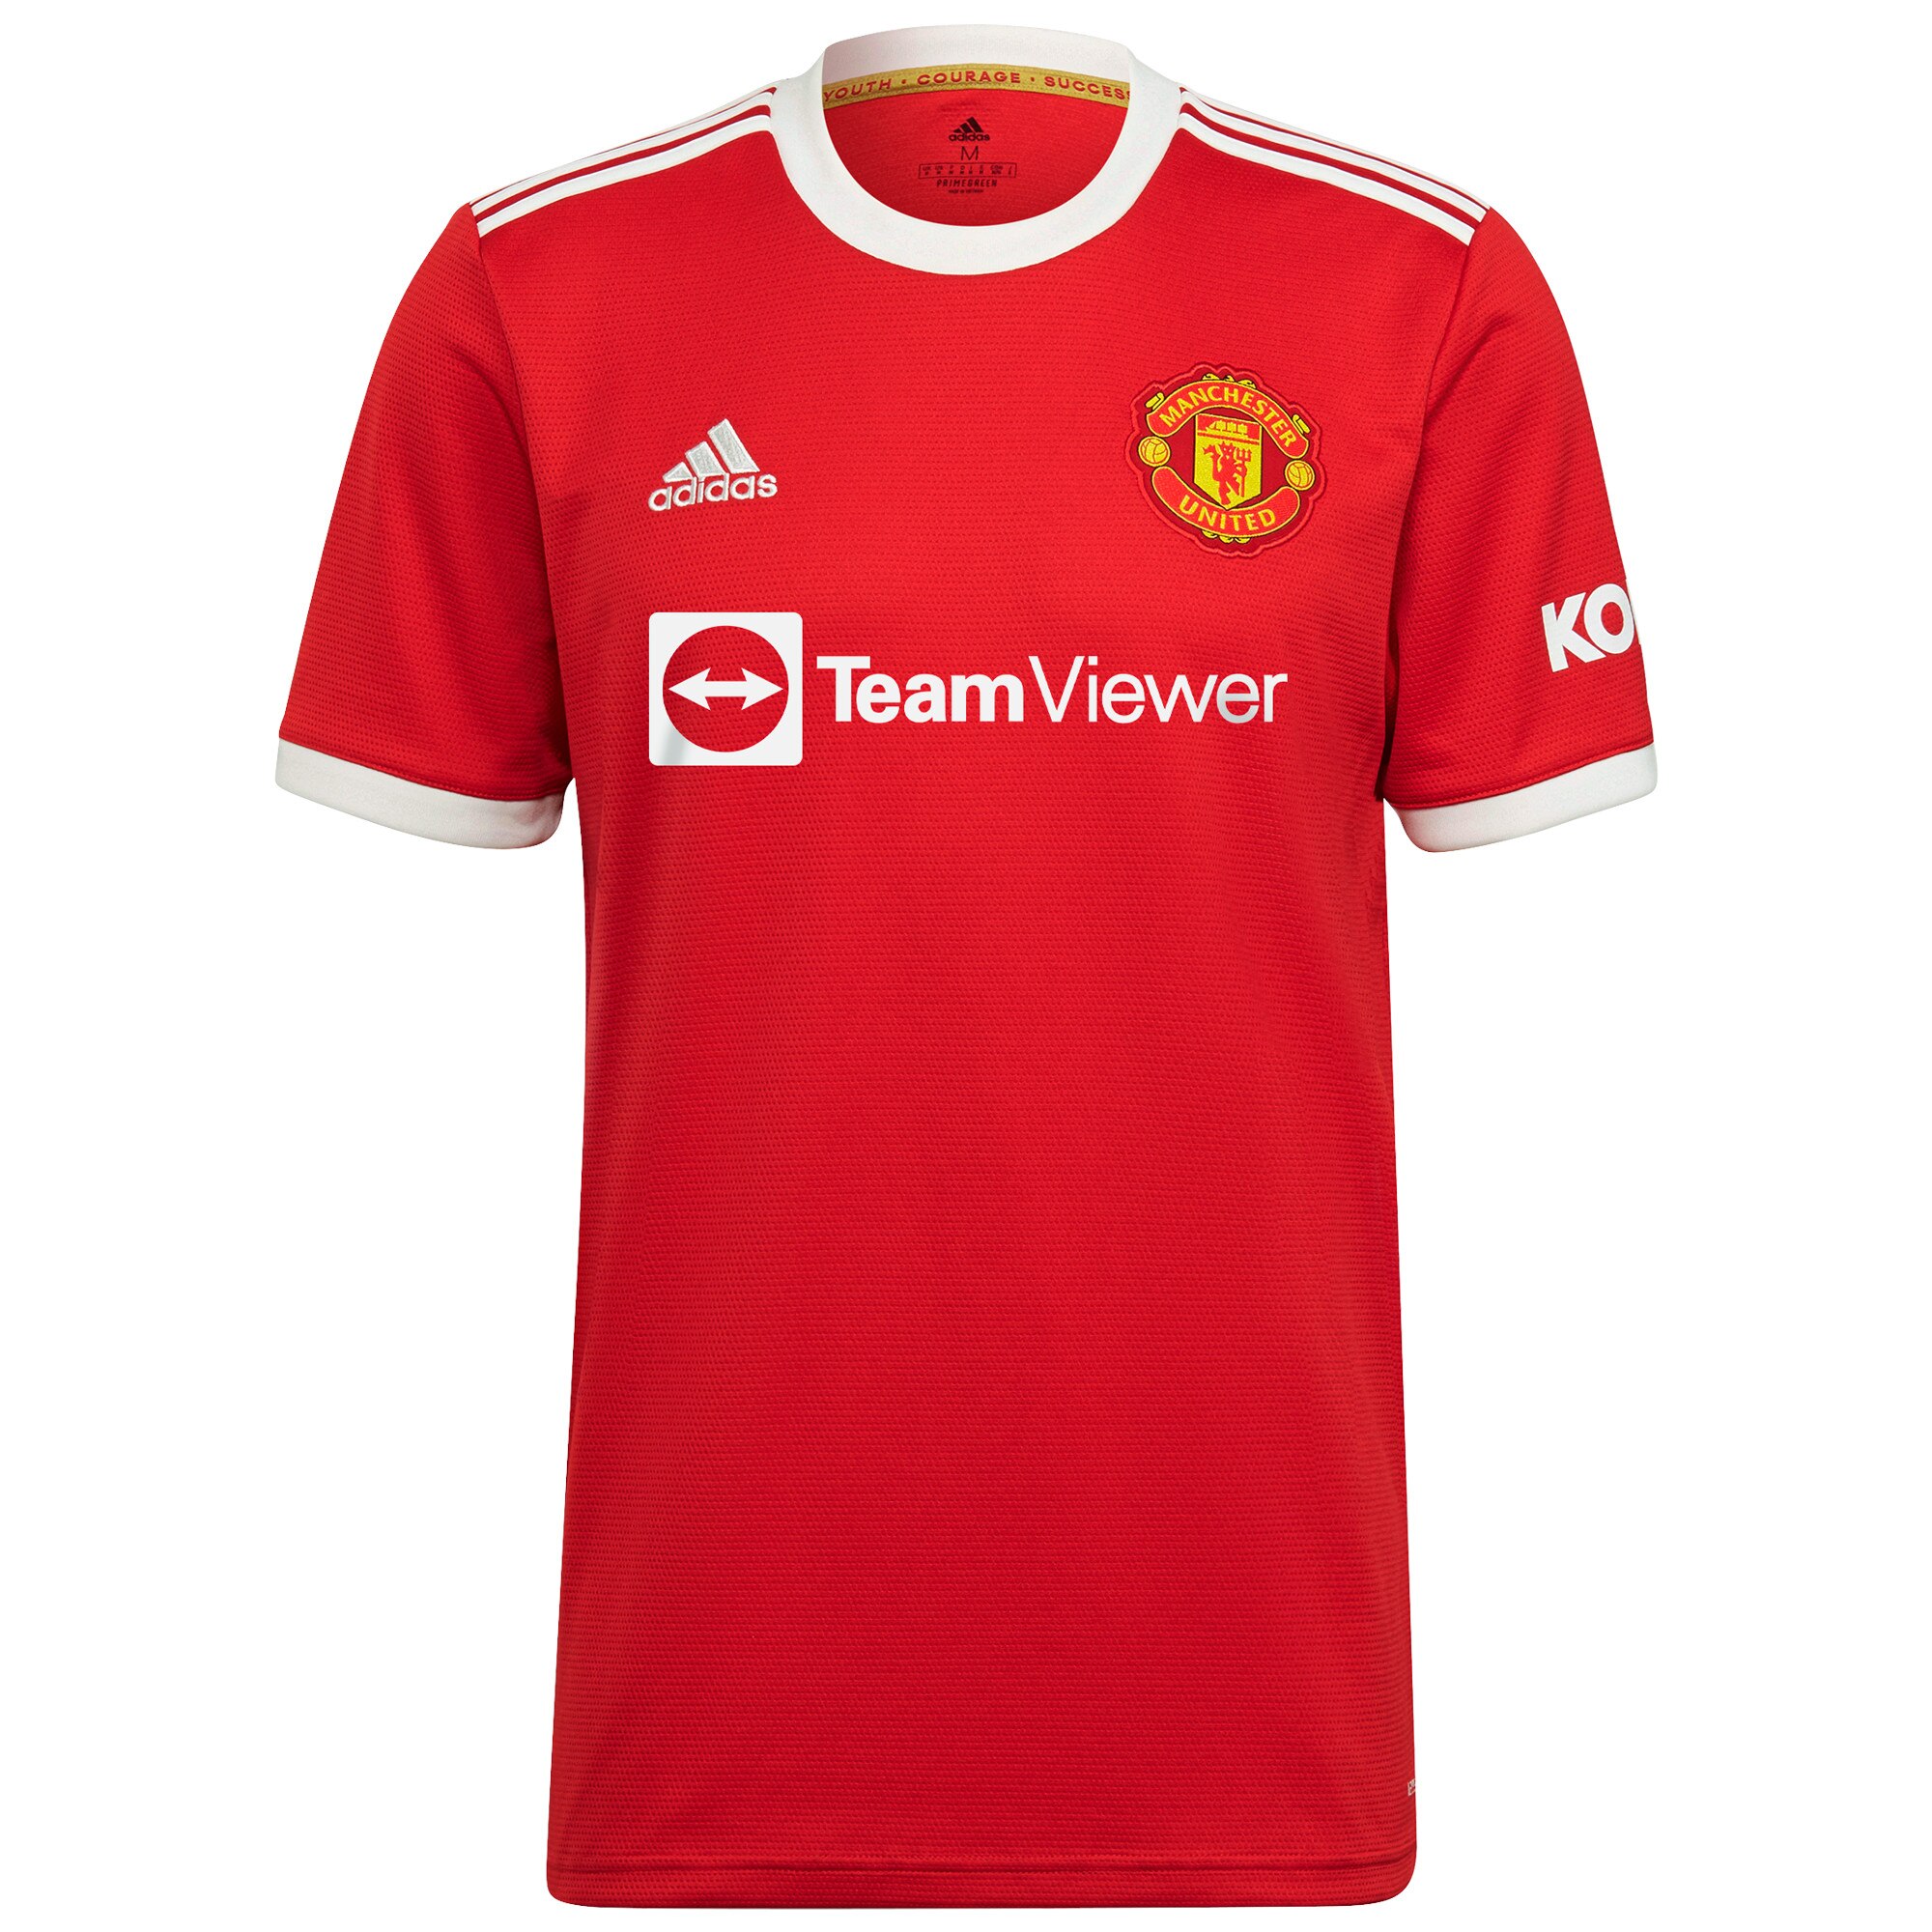 Manchester United Cup Home Shirt 2021-22 with B.Fernandes 18 printing